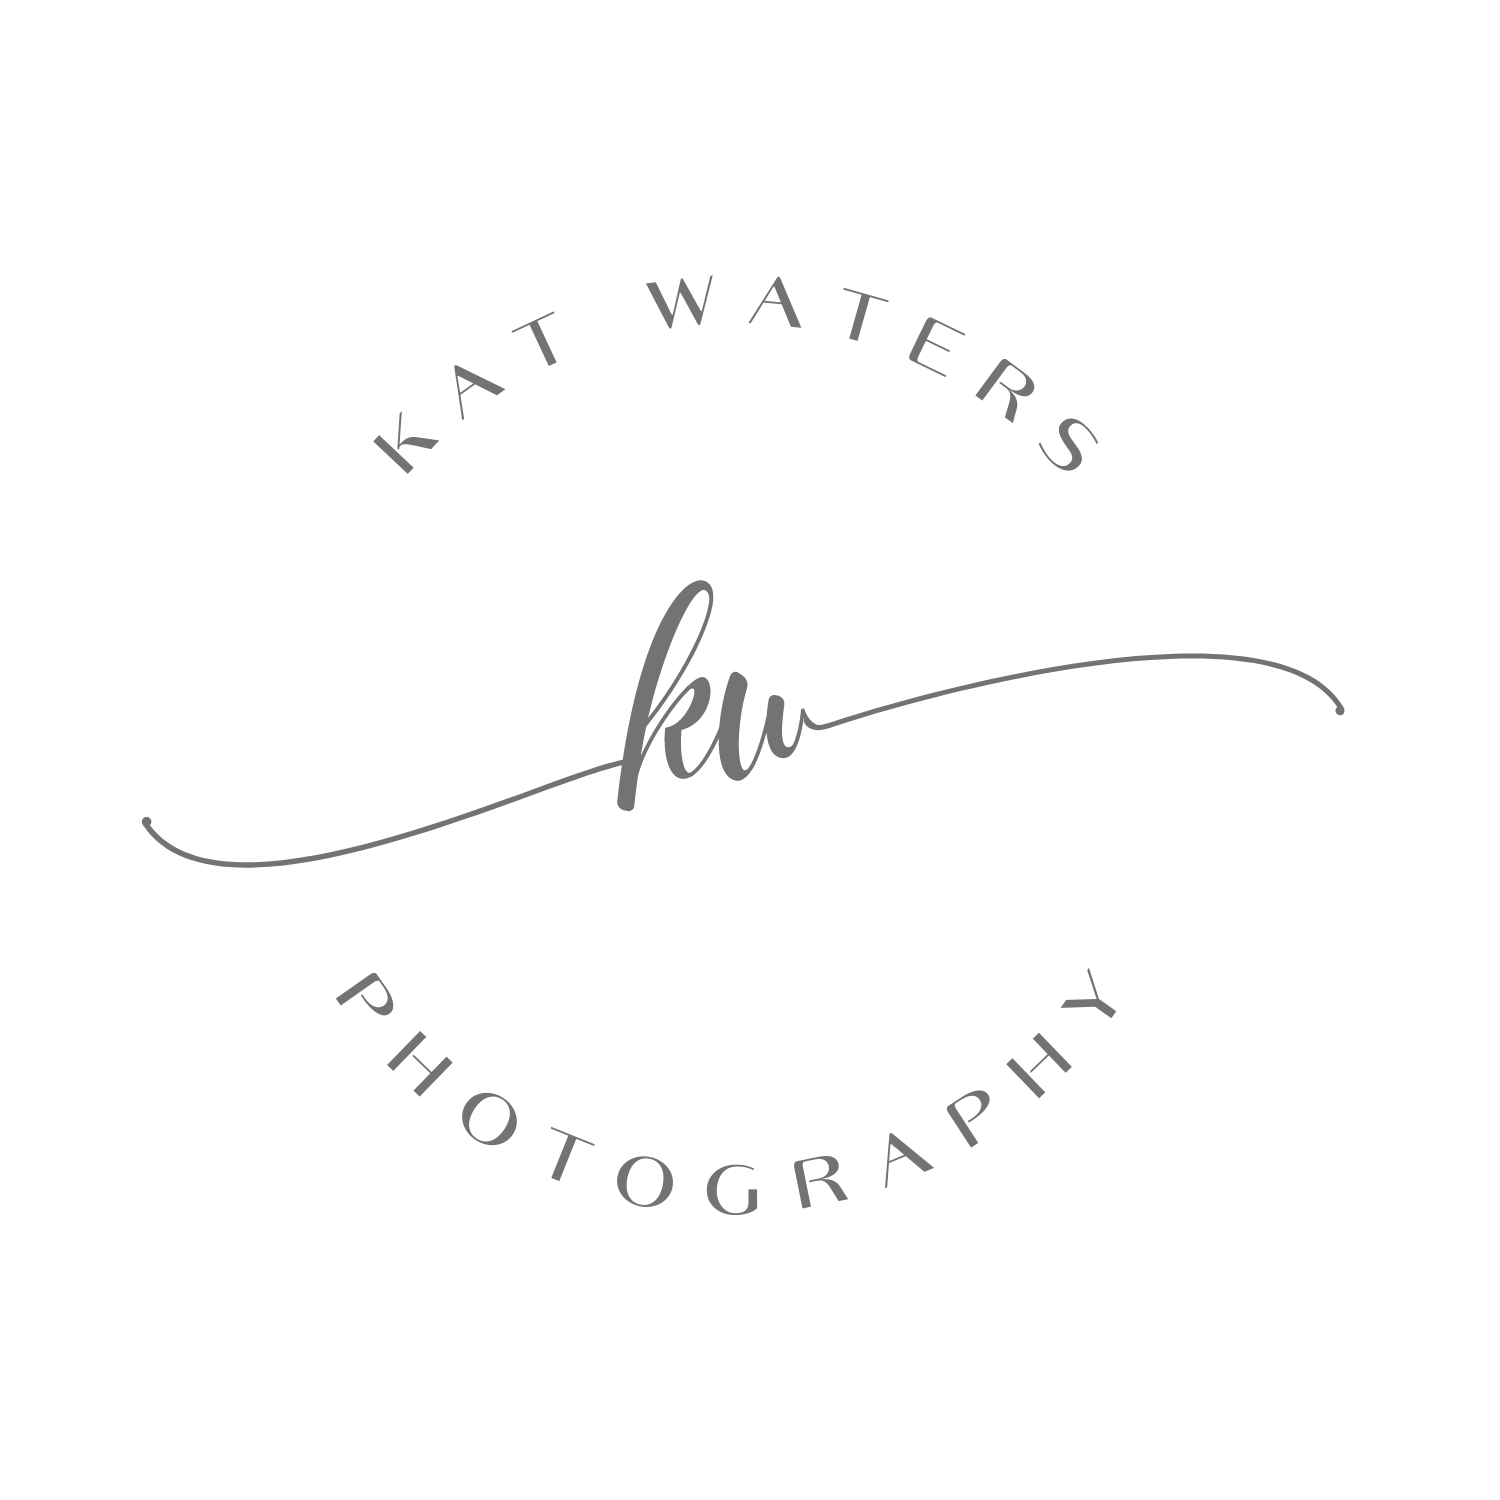 KAT WATERS PHOTOGRAPHY